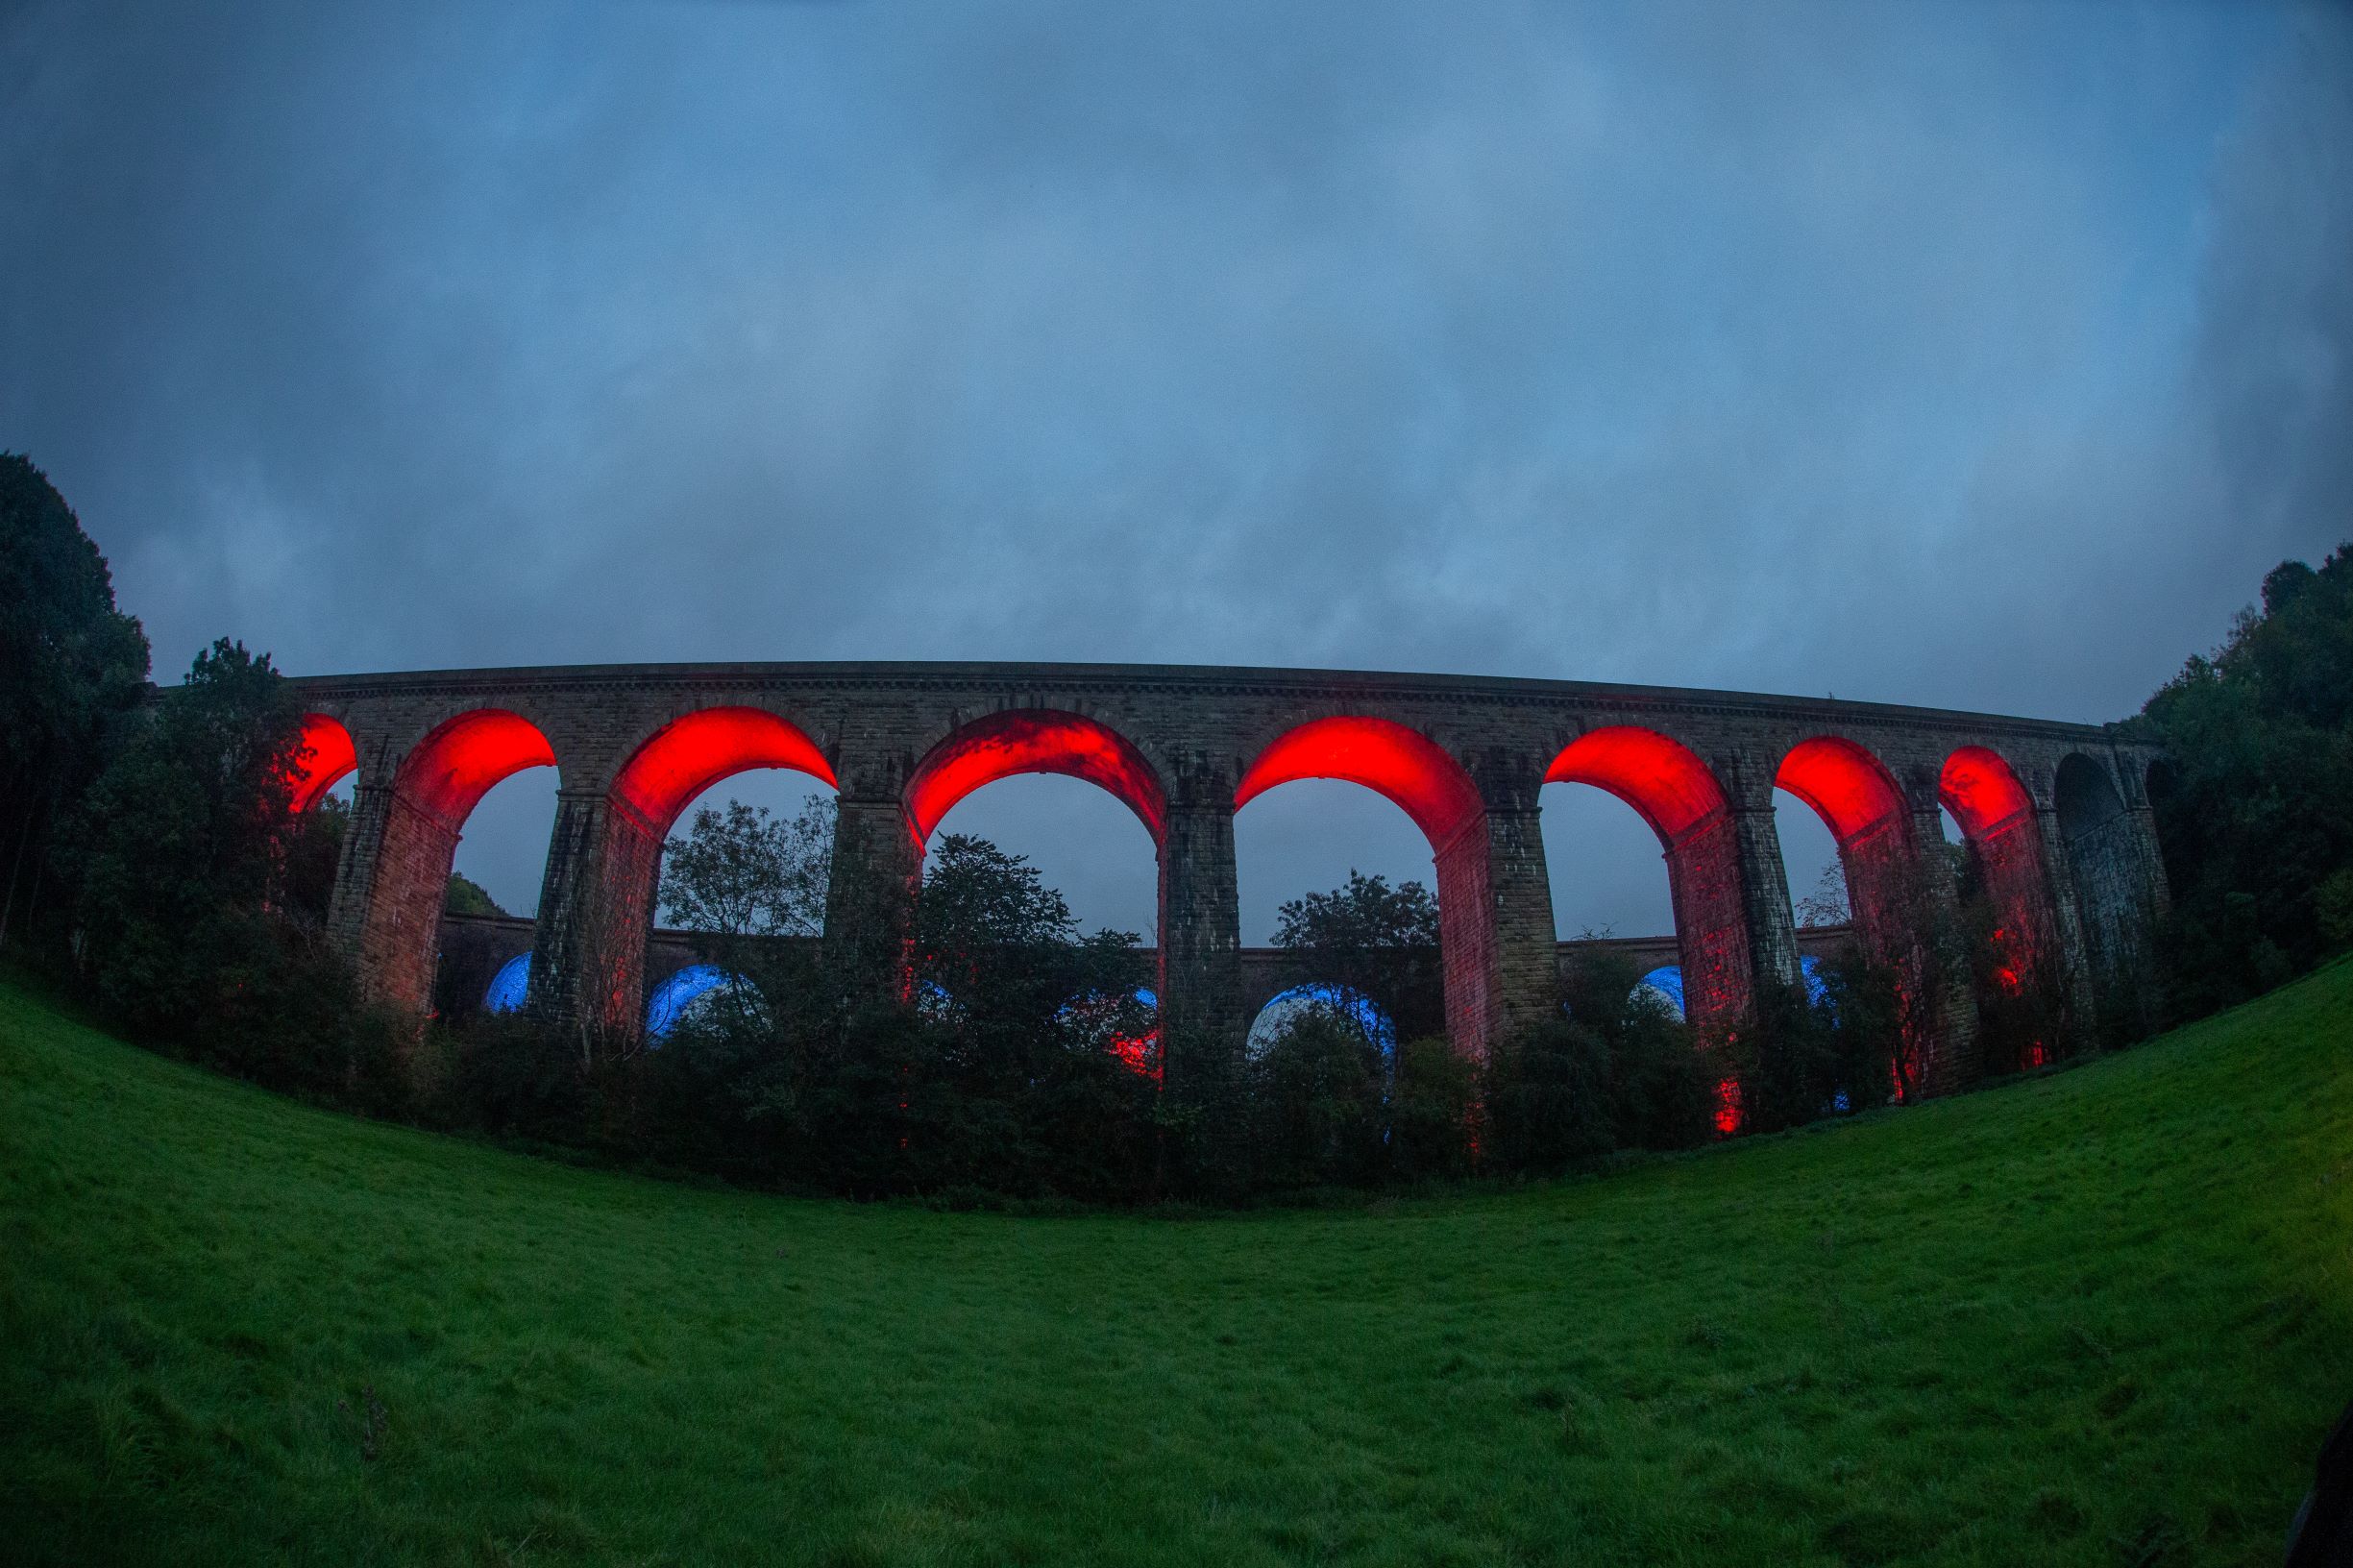 3 week luminaire spectacular for World Heritage Site